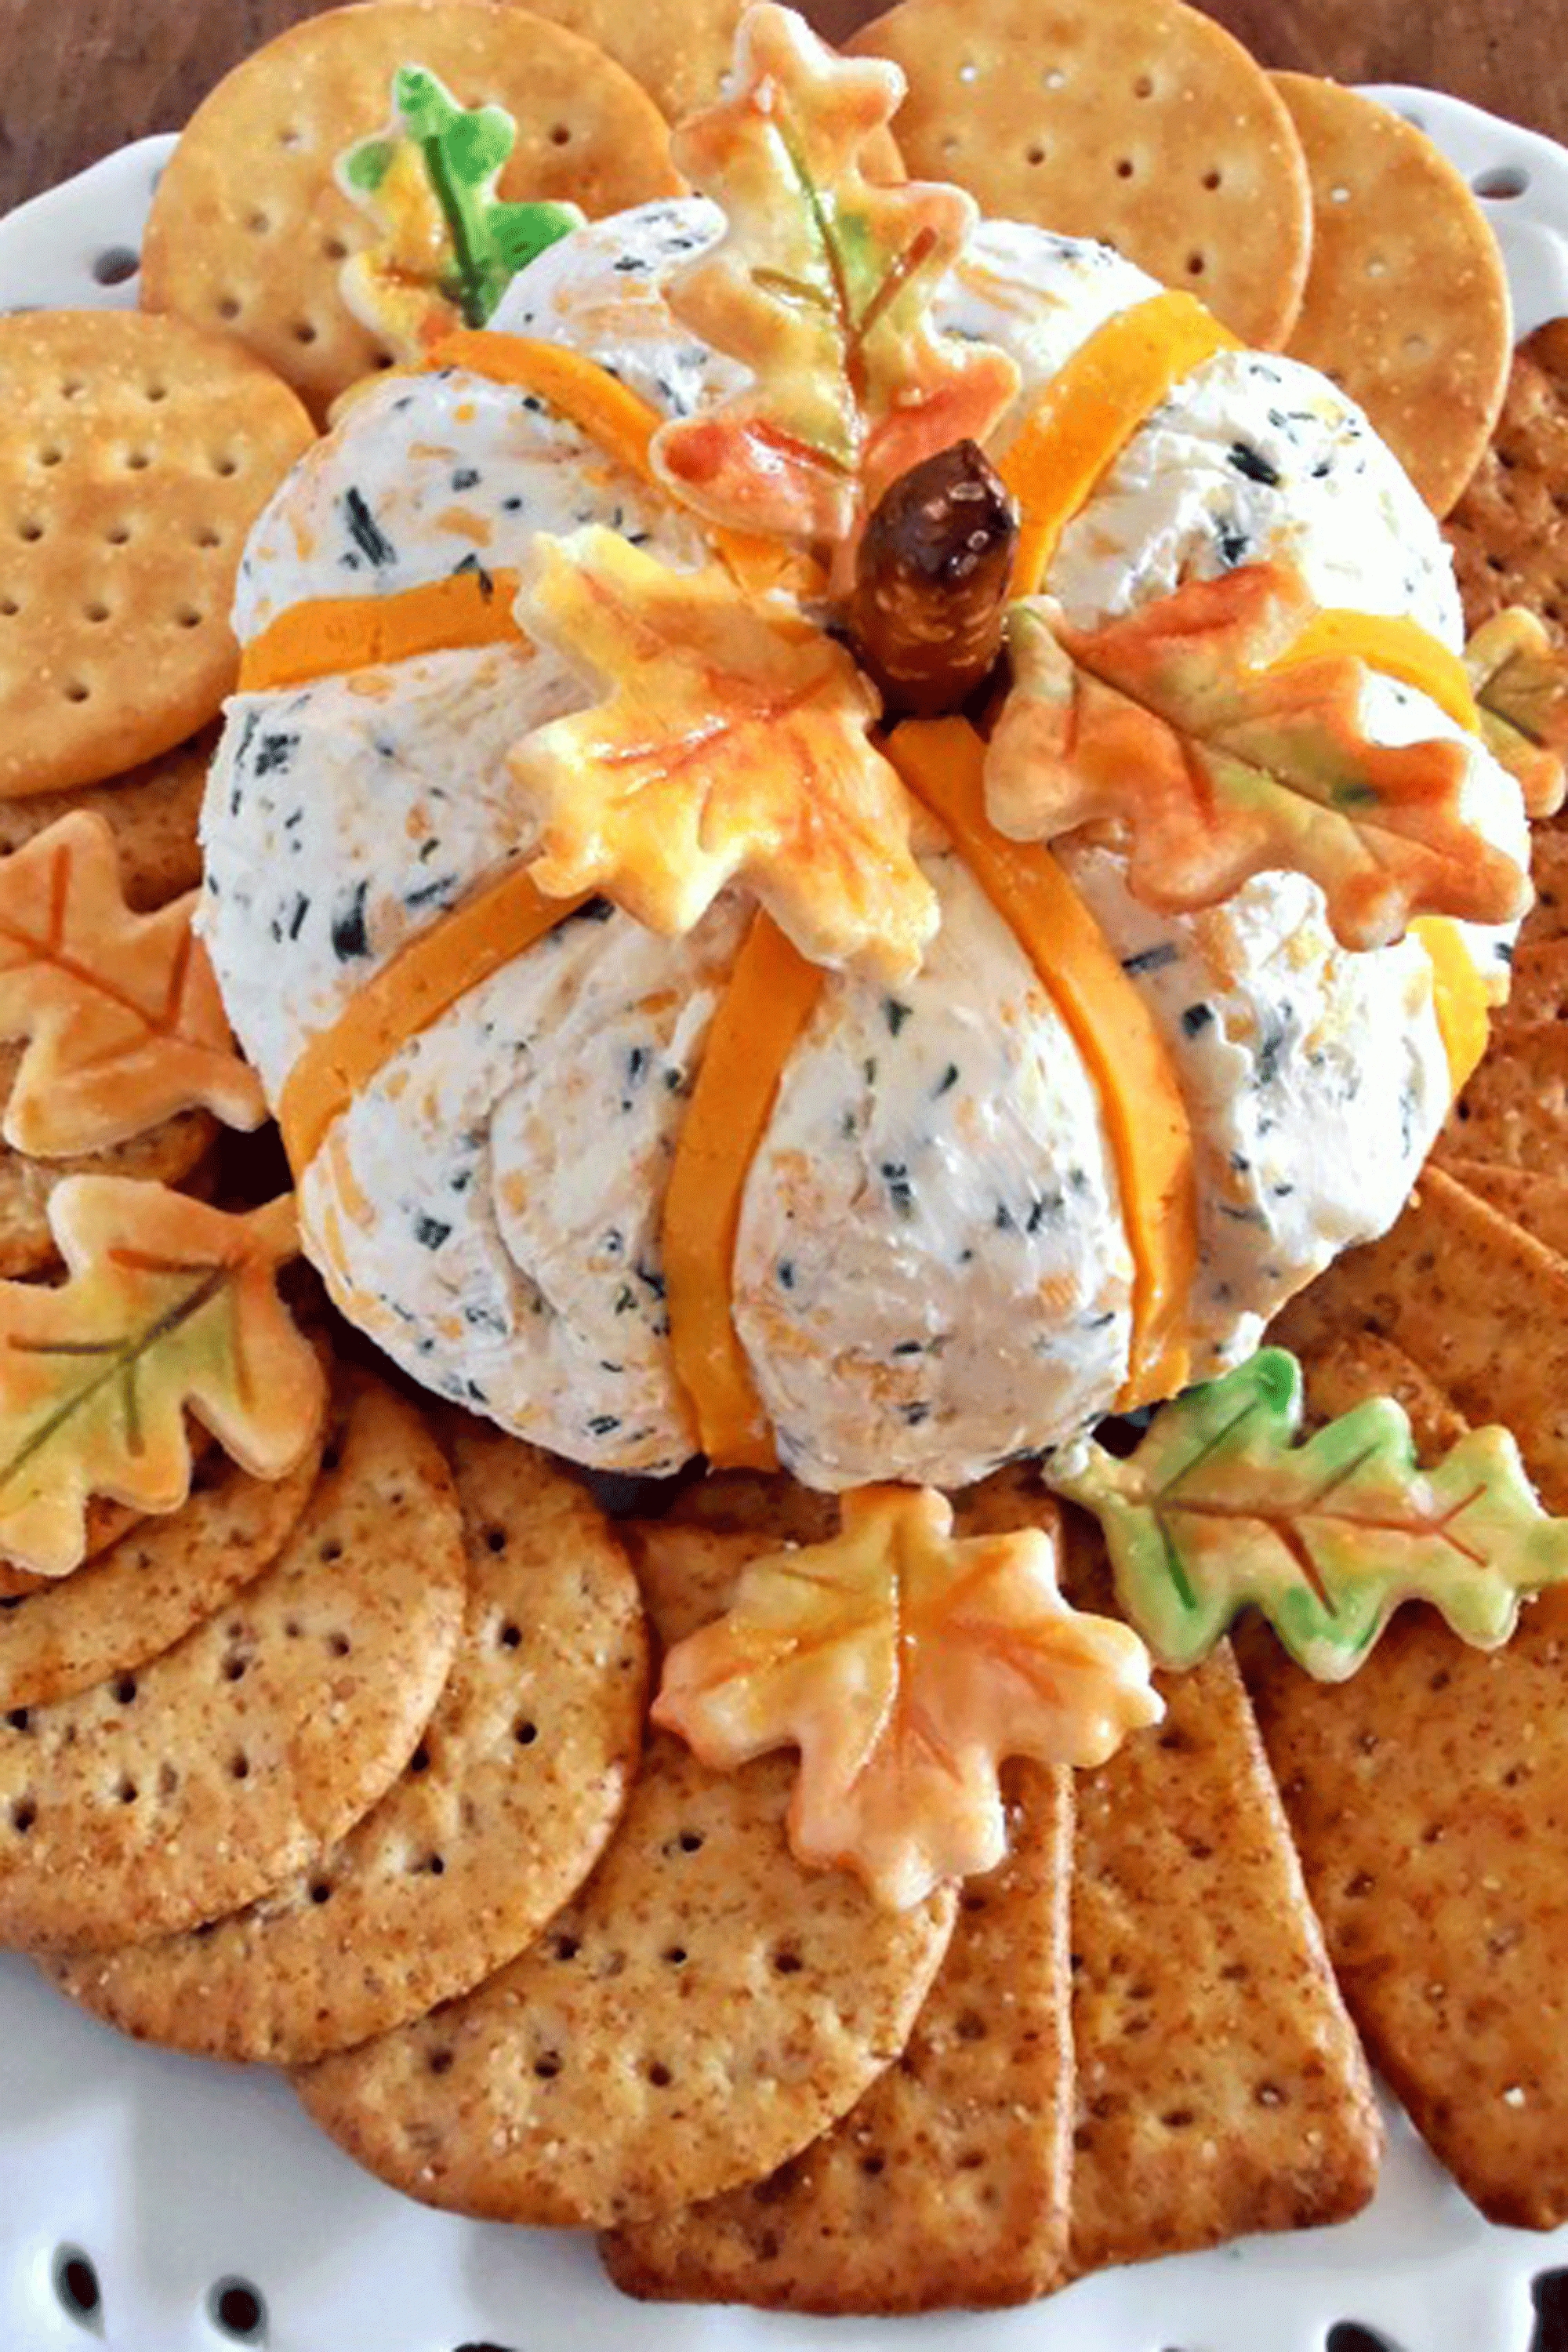 10 Most Popular Halloween Birthday Party Food Ideas 21 wickedly good appetizers to get your halloween party started 5 2022